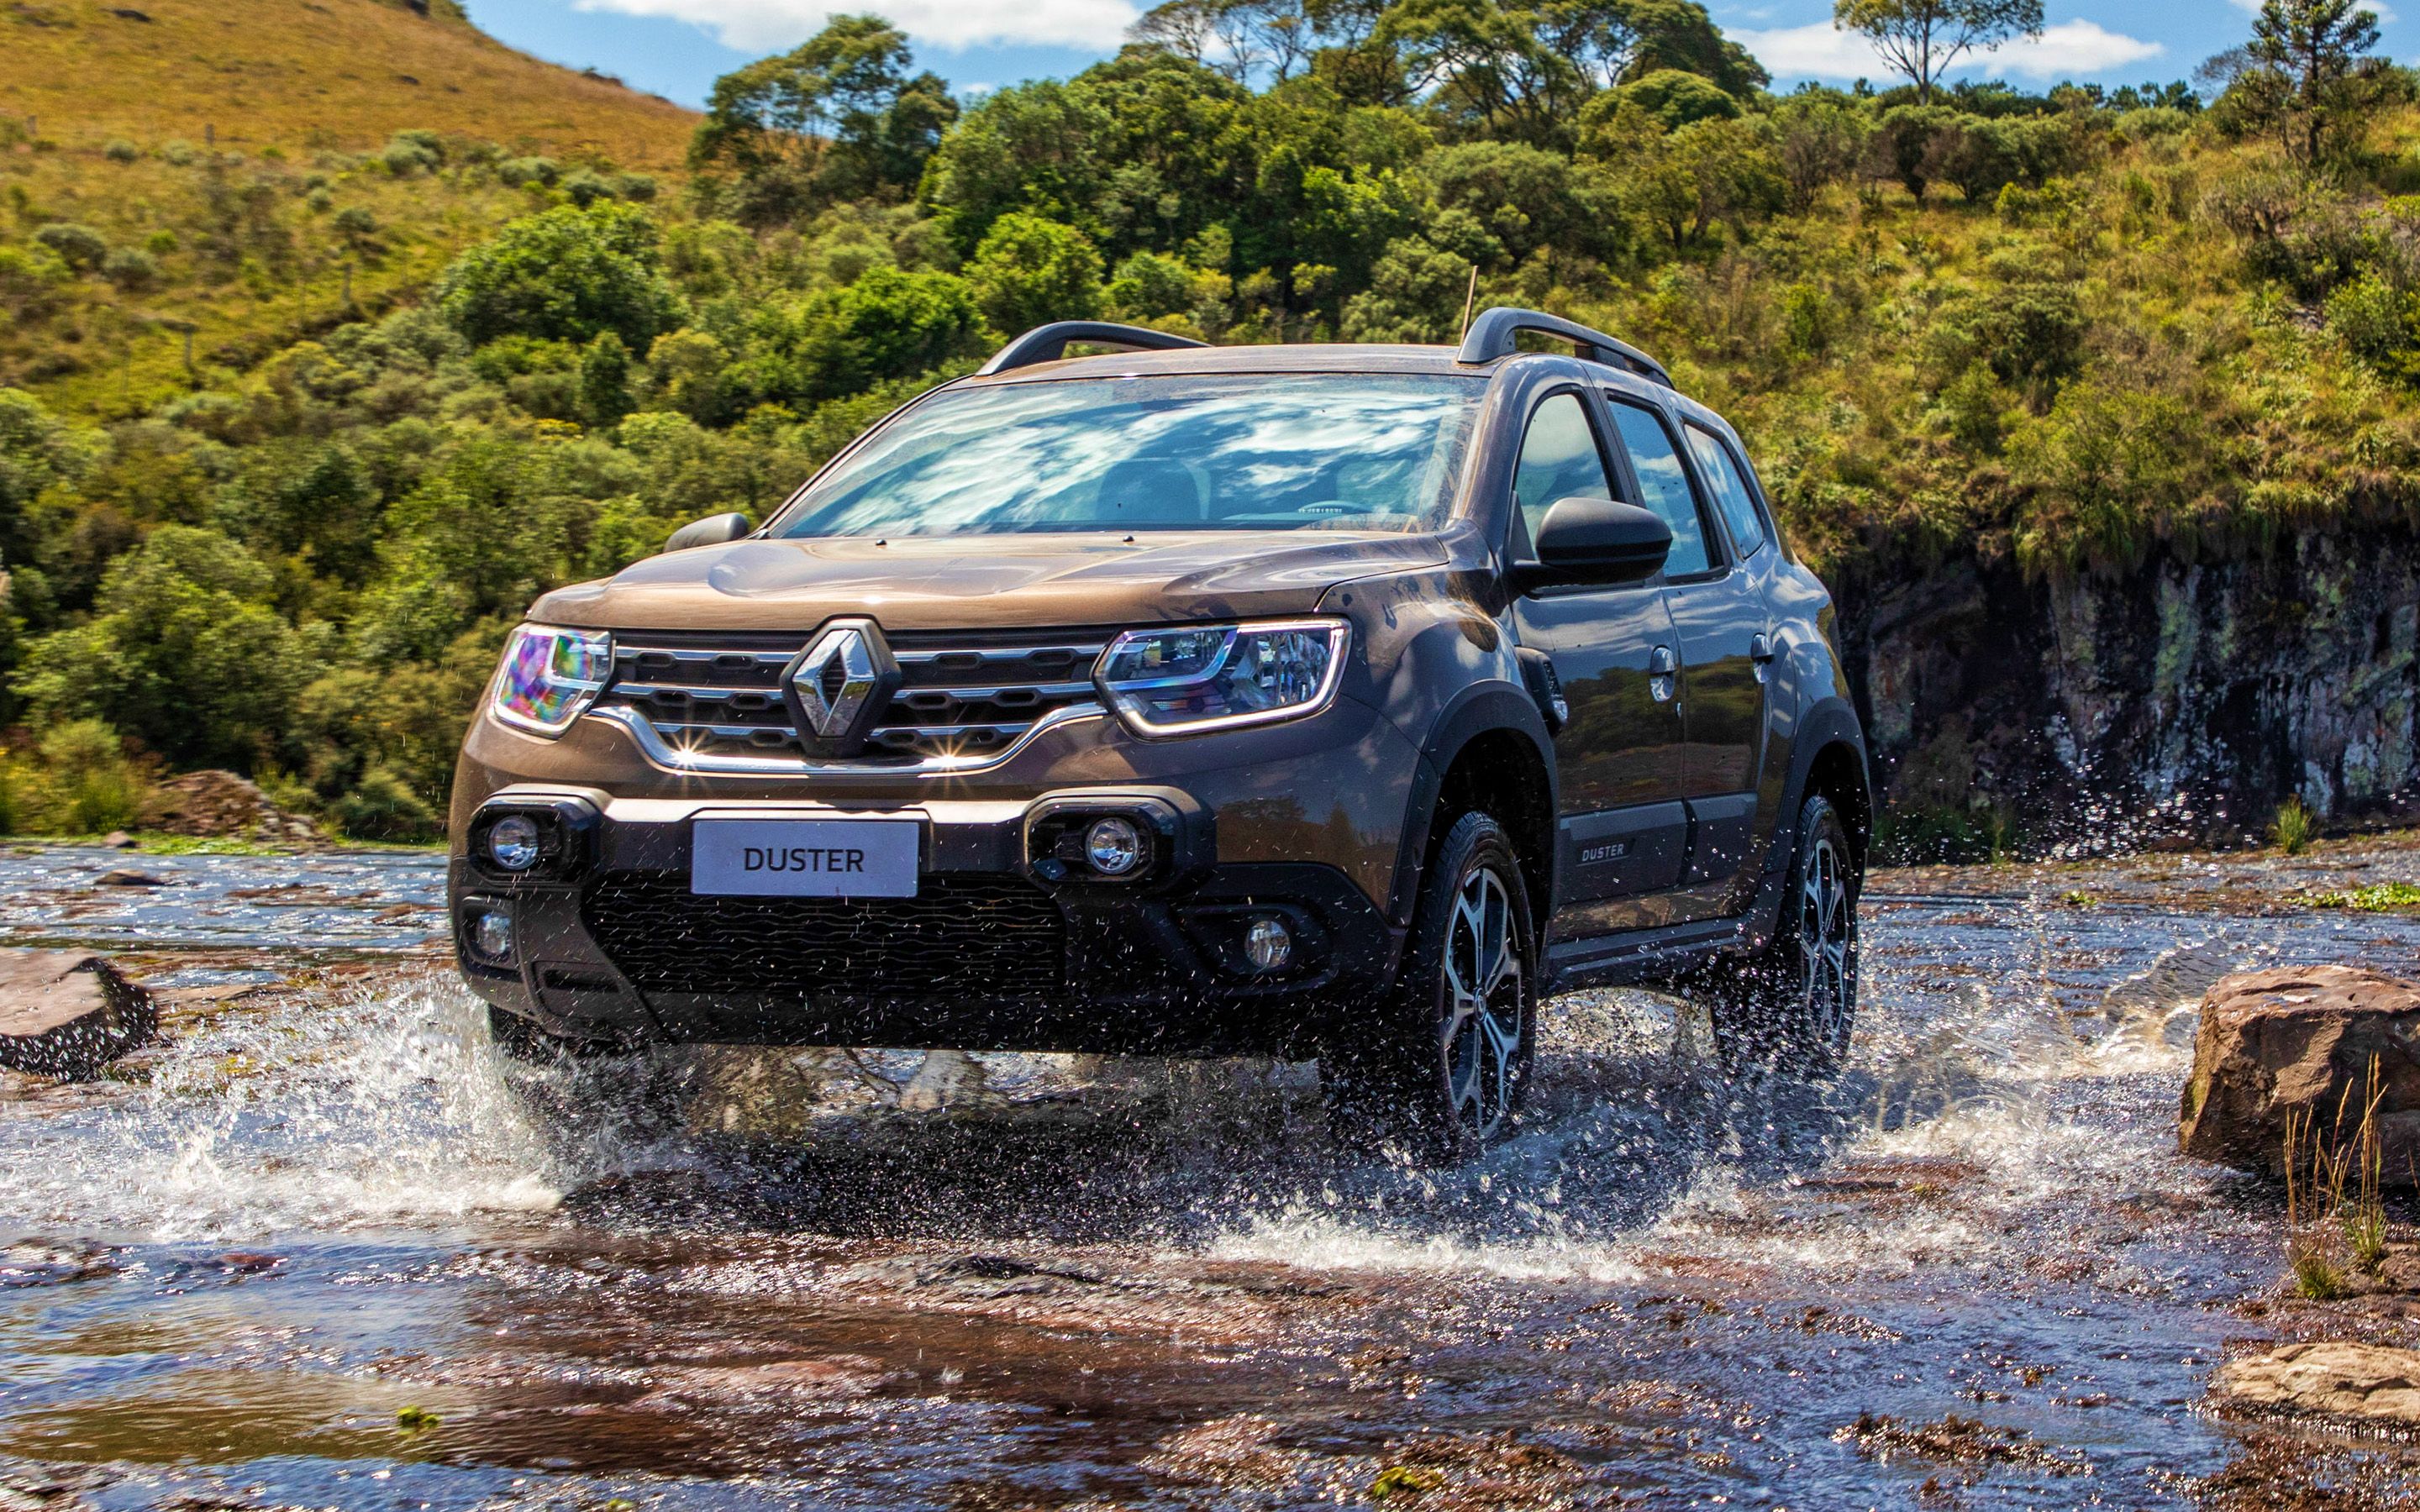 Download Wallpaper 4k, Renault Duster, Car In River, 2020 Cars, BR Spec, Offroad, 2020 Renault Duster, French Cars, Renault For Desktop With Resolution 2880x1800. High Quality HD Picture Wallpaper